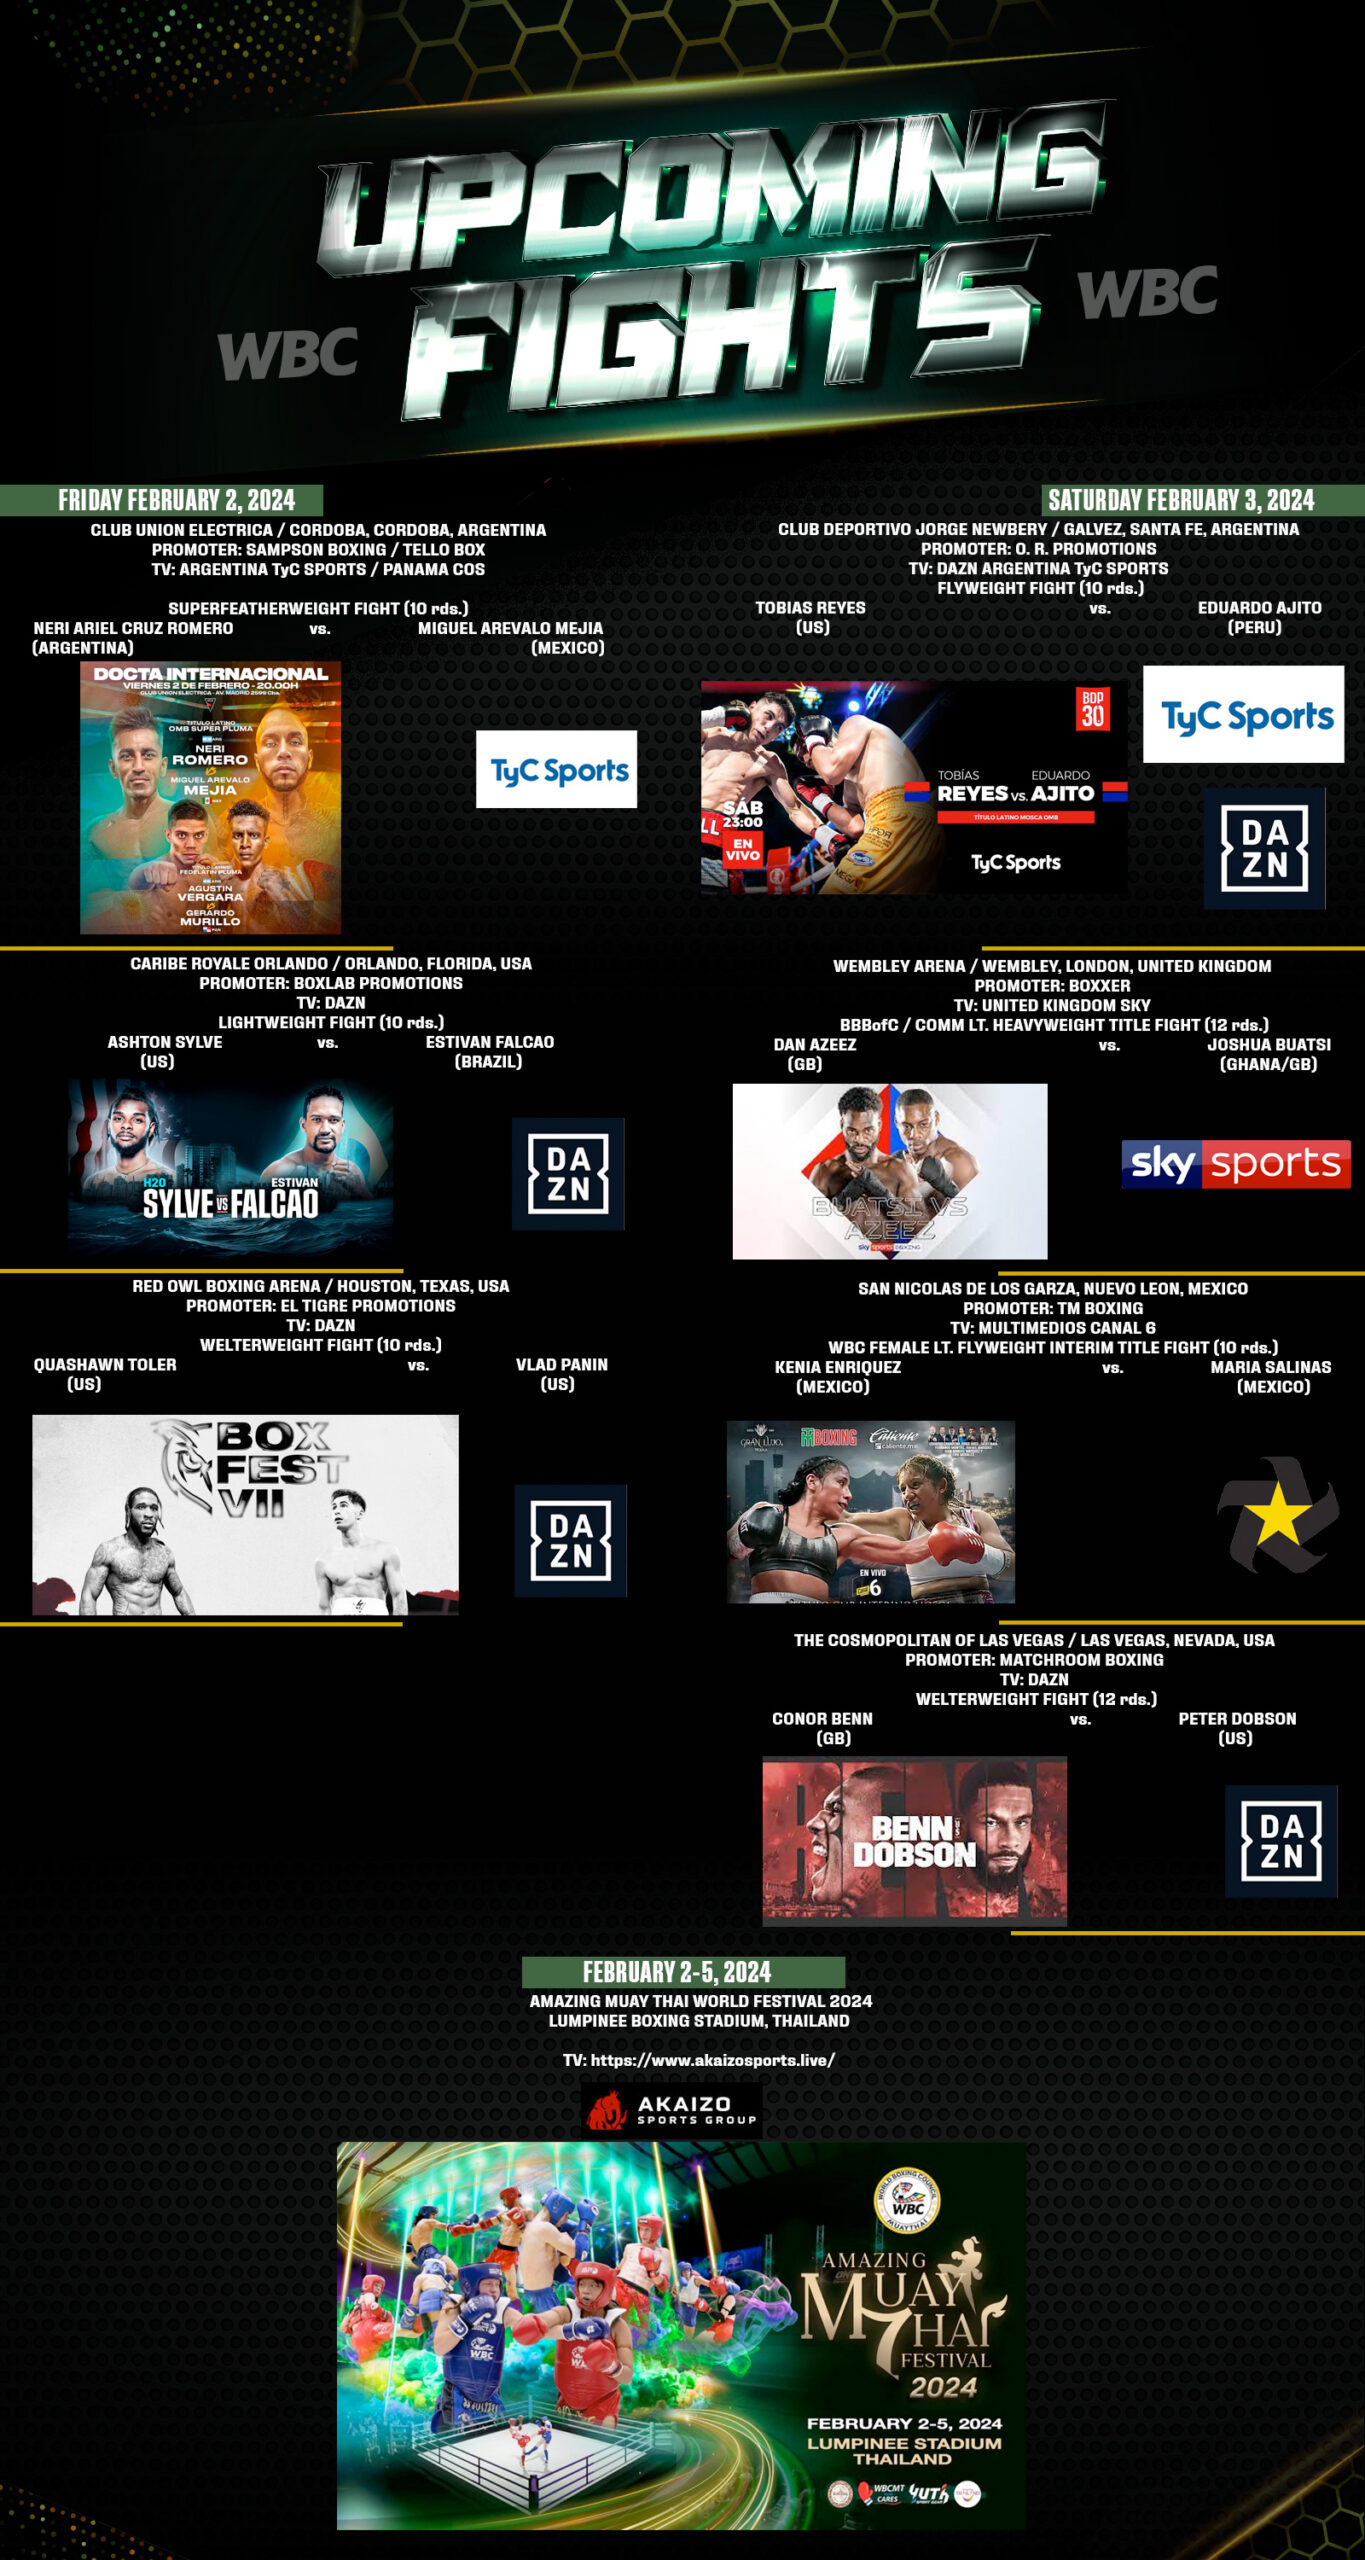 WBC Fight Schedule of the Week World Boxing Council